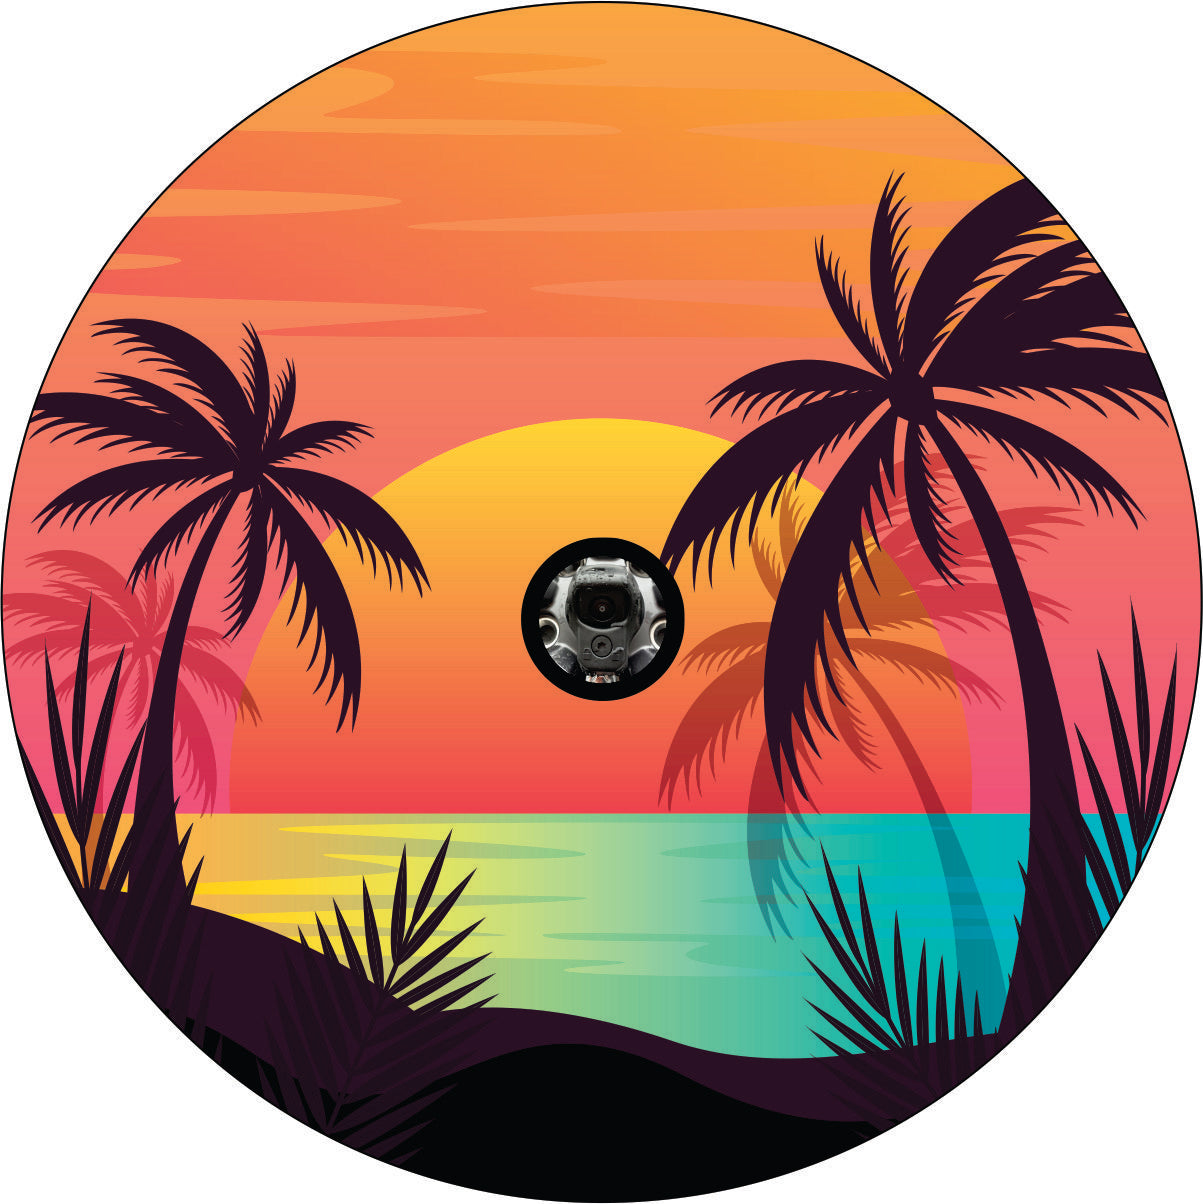 Tropical colors make up a sunset scene at the sea with palm tree silhouettes and the big sun setting on the horizon spare tire cover design with a back up camera